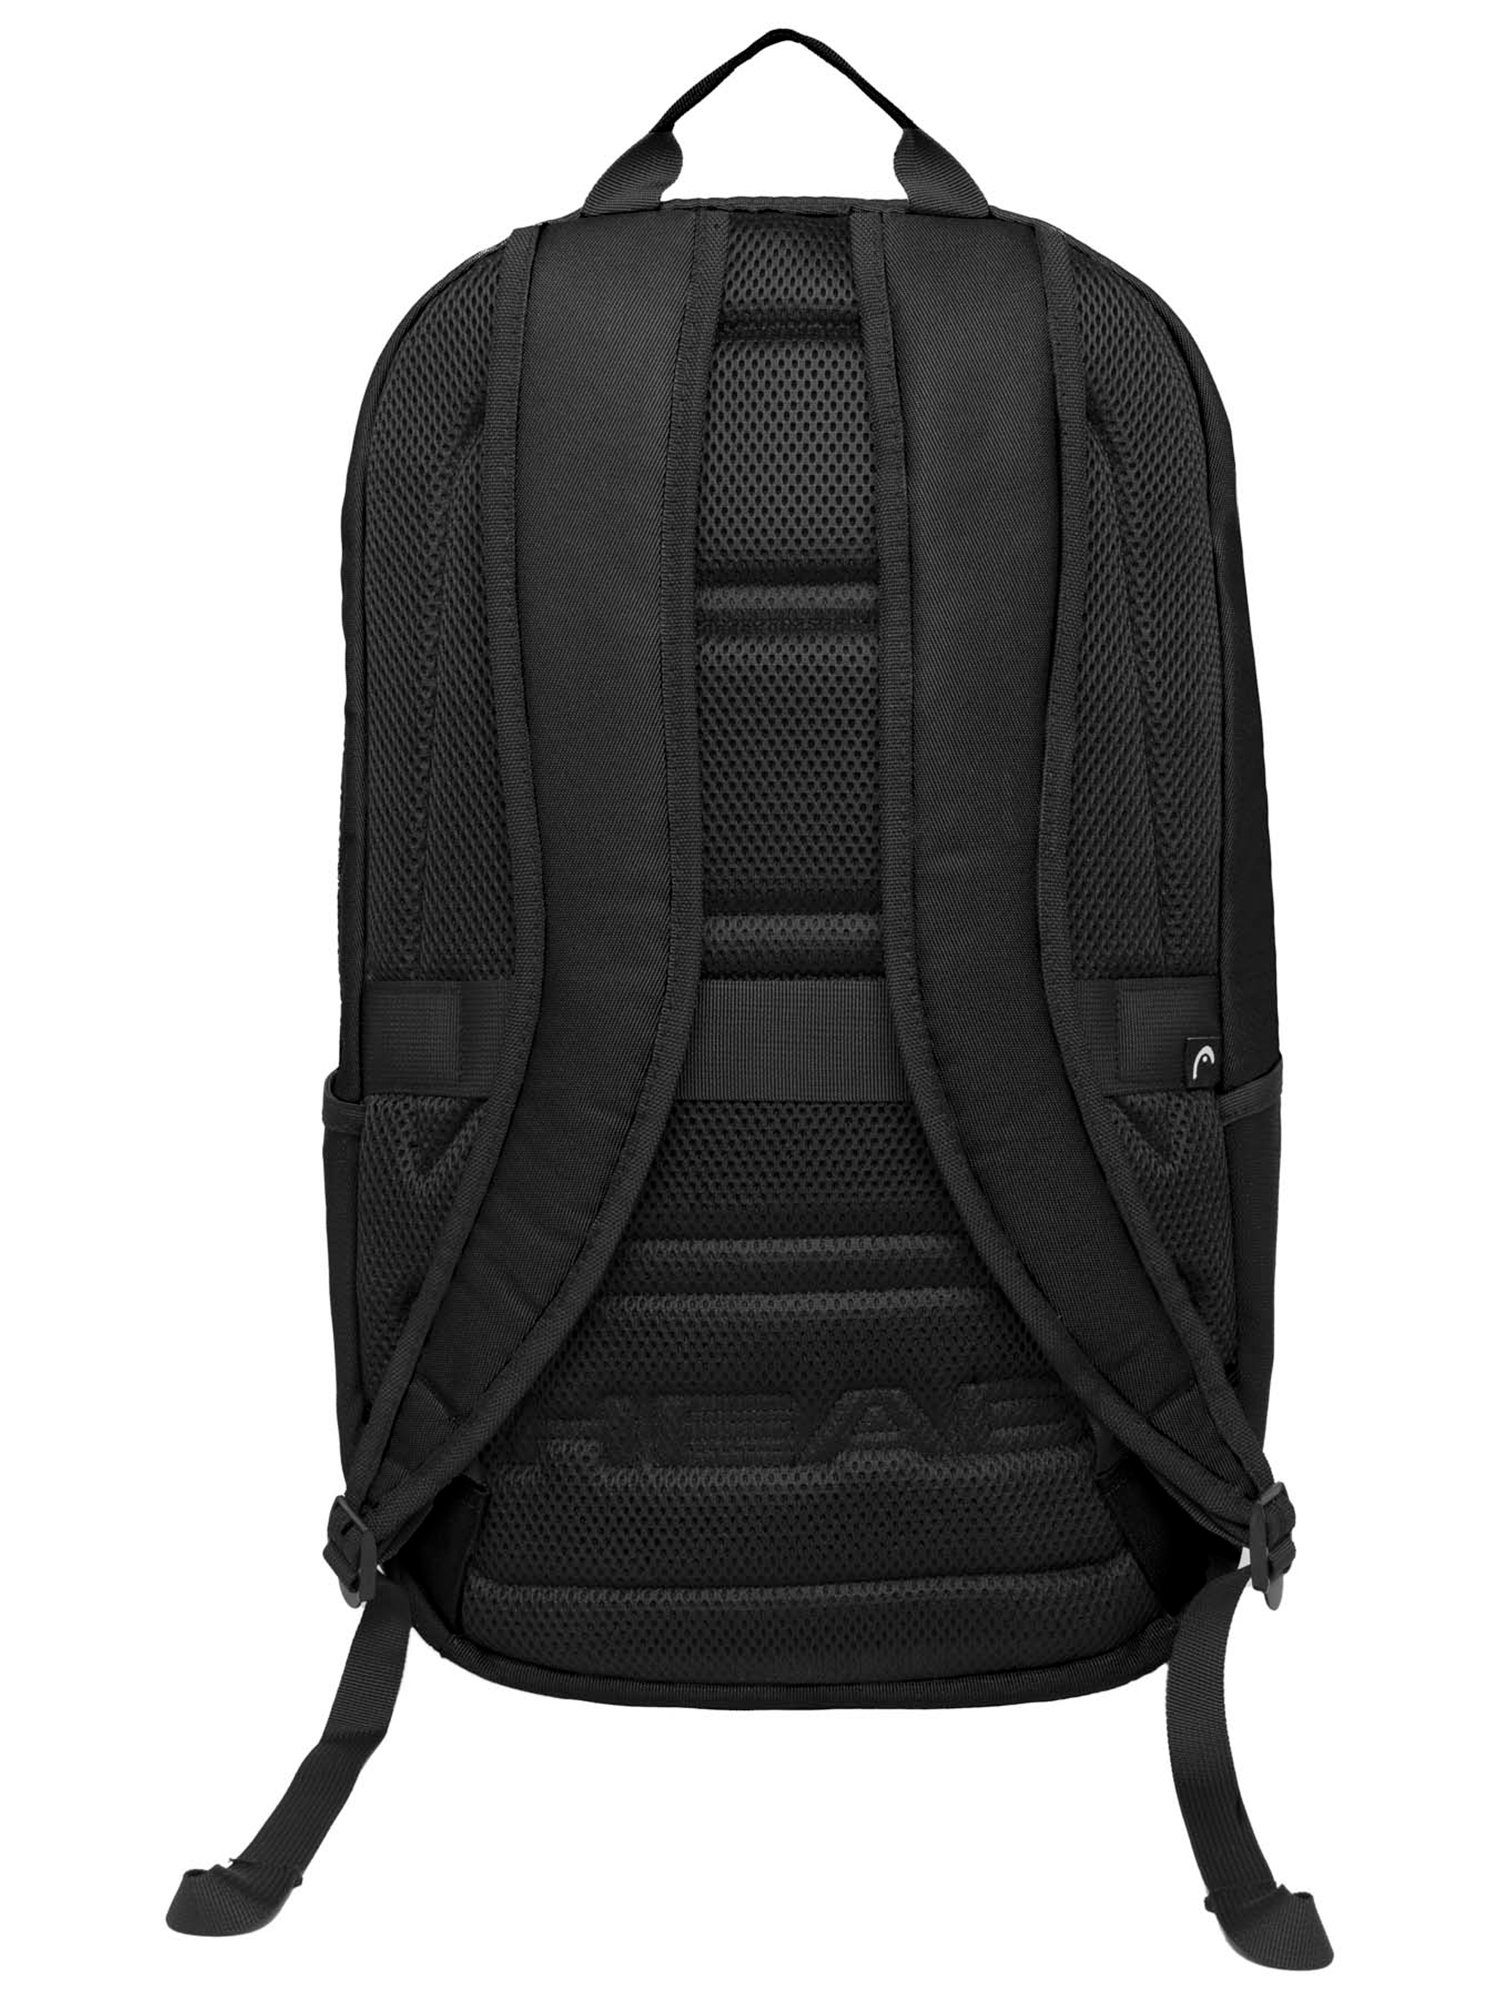 Rucksack Head Point 2 Schwarz Backpack Compartments